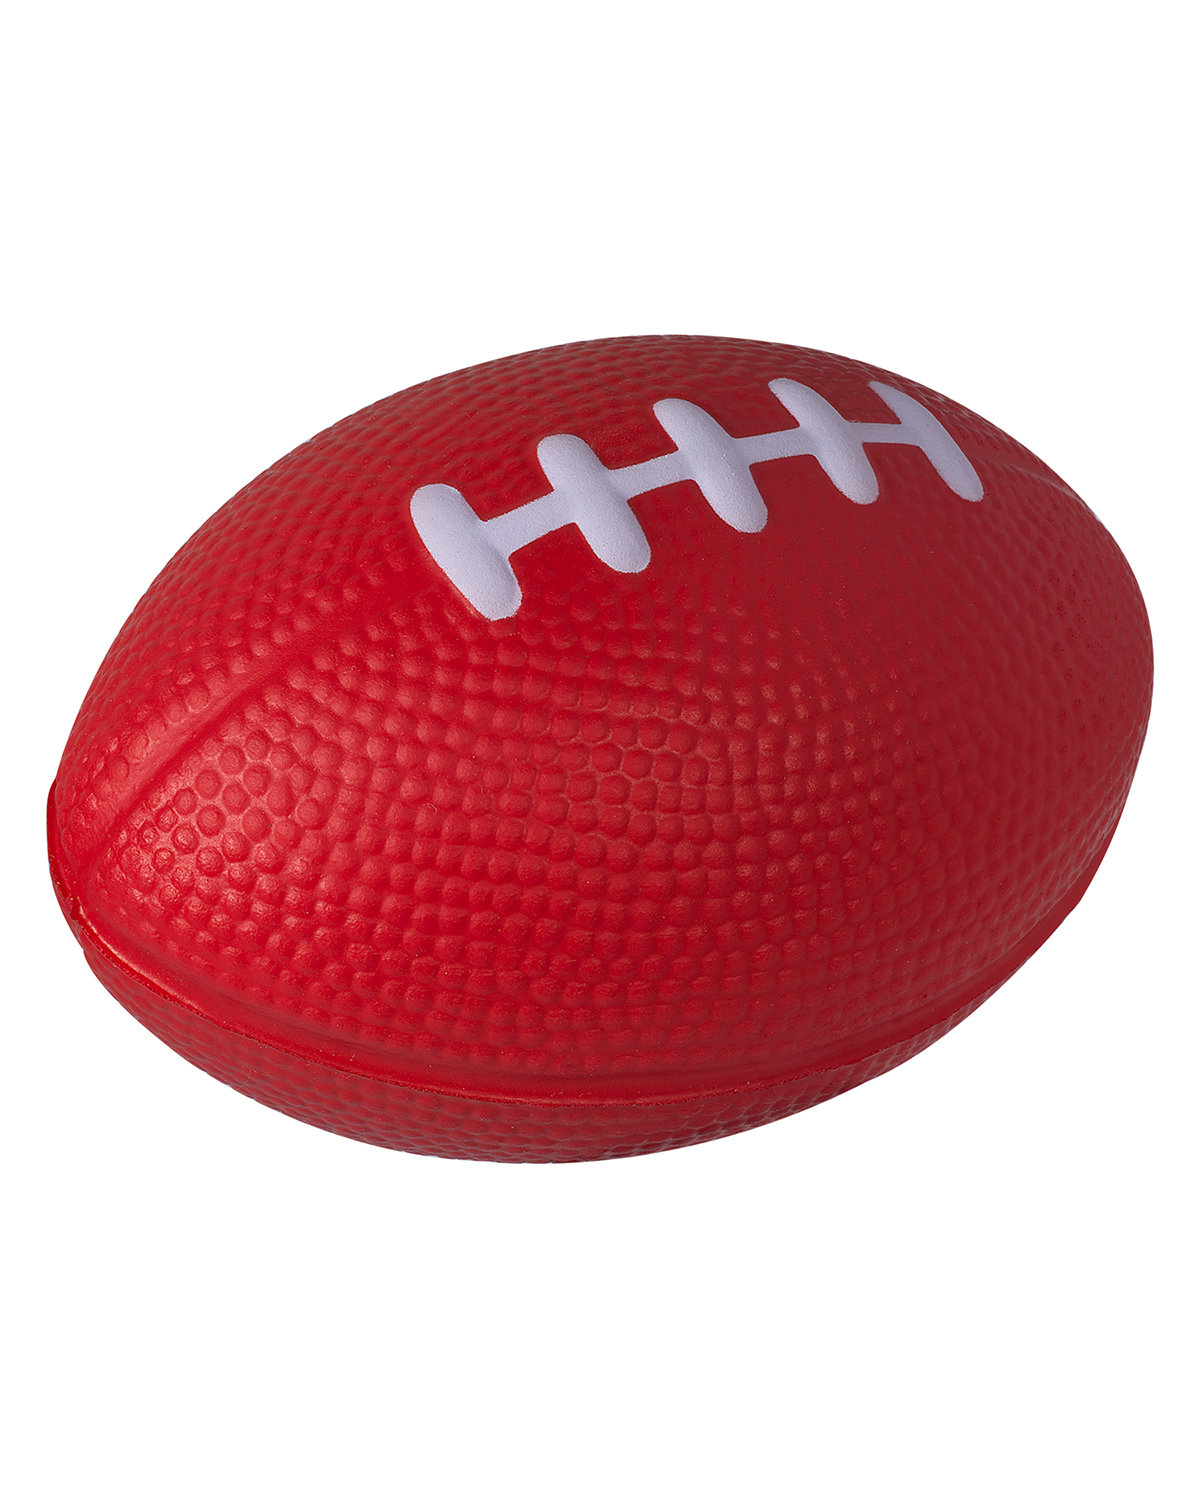 Prime Line Football Stress Reliever 3" red 